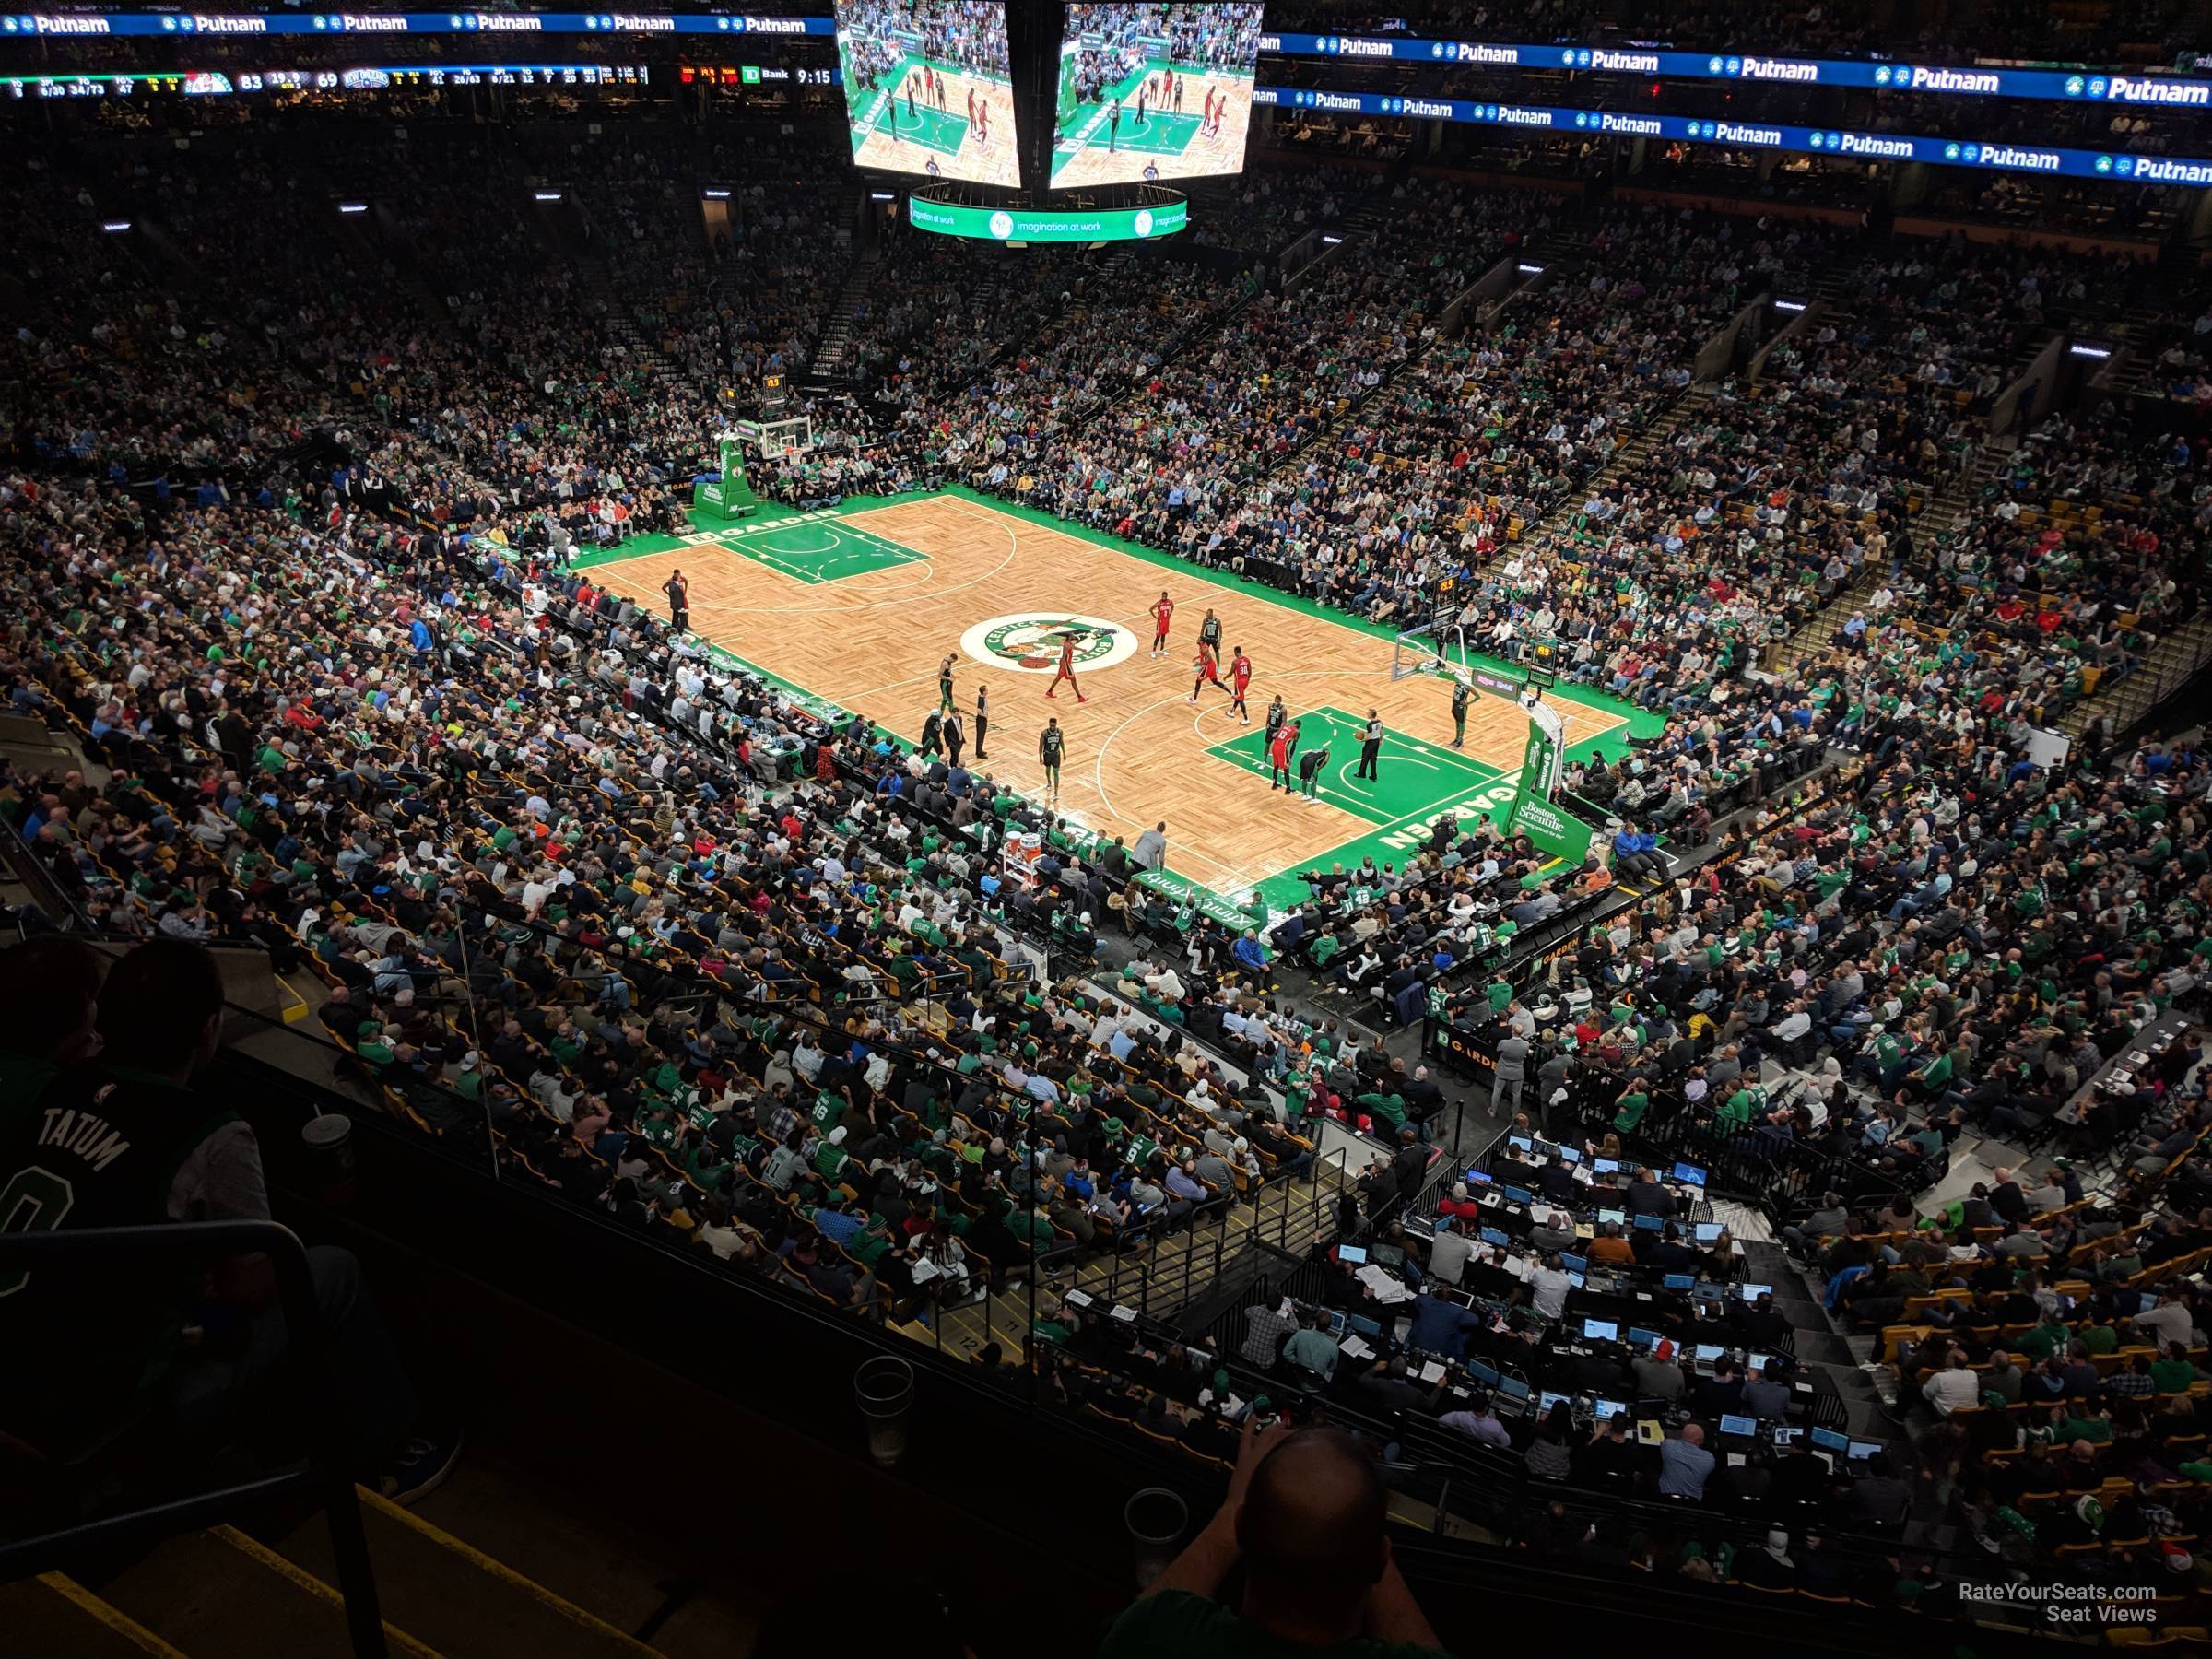 section 327, row 3 seat view  for basketball - td garden